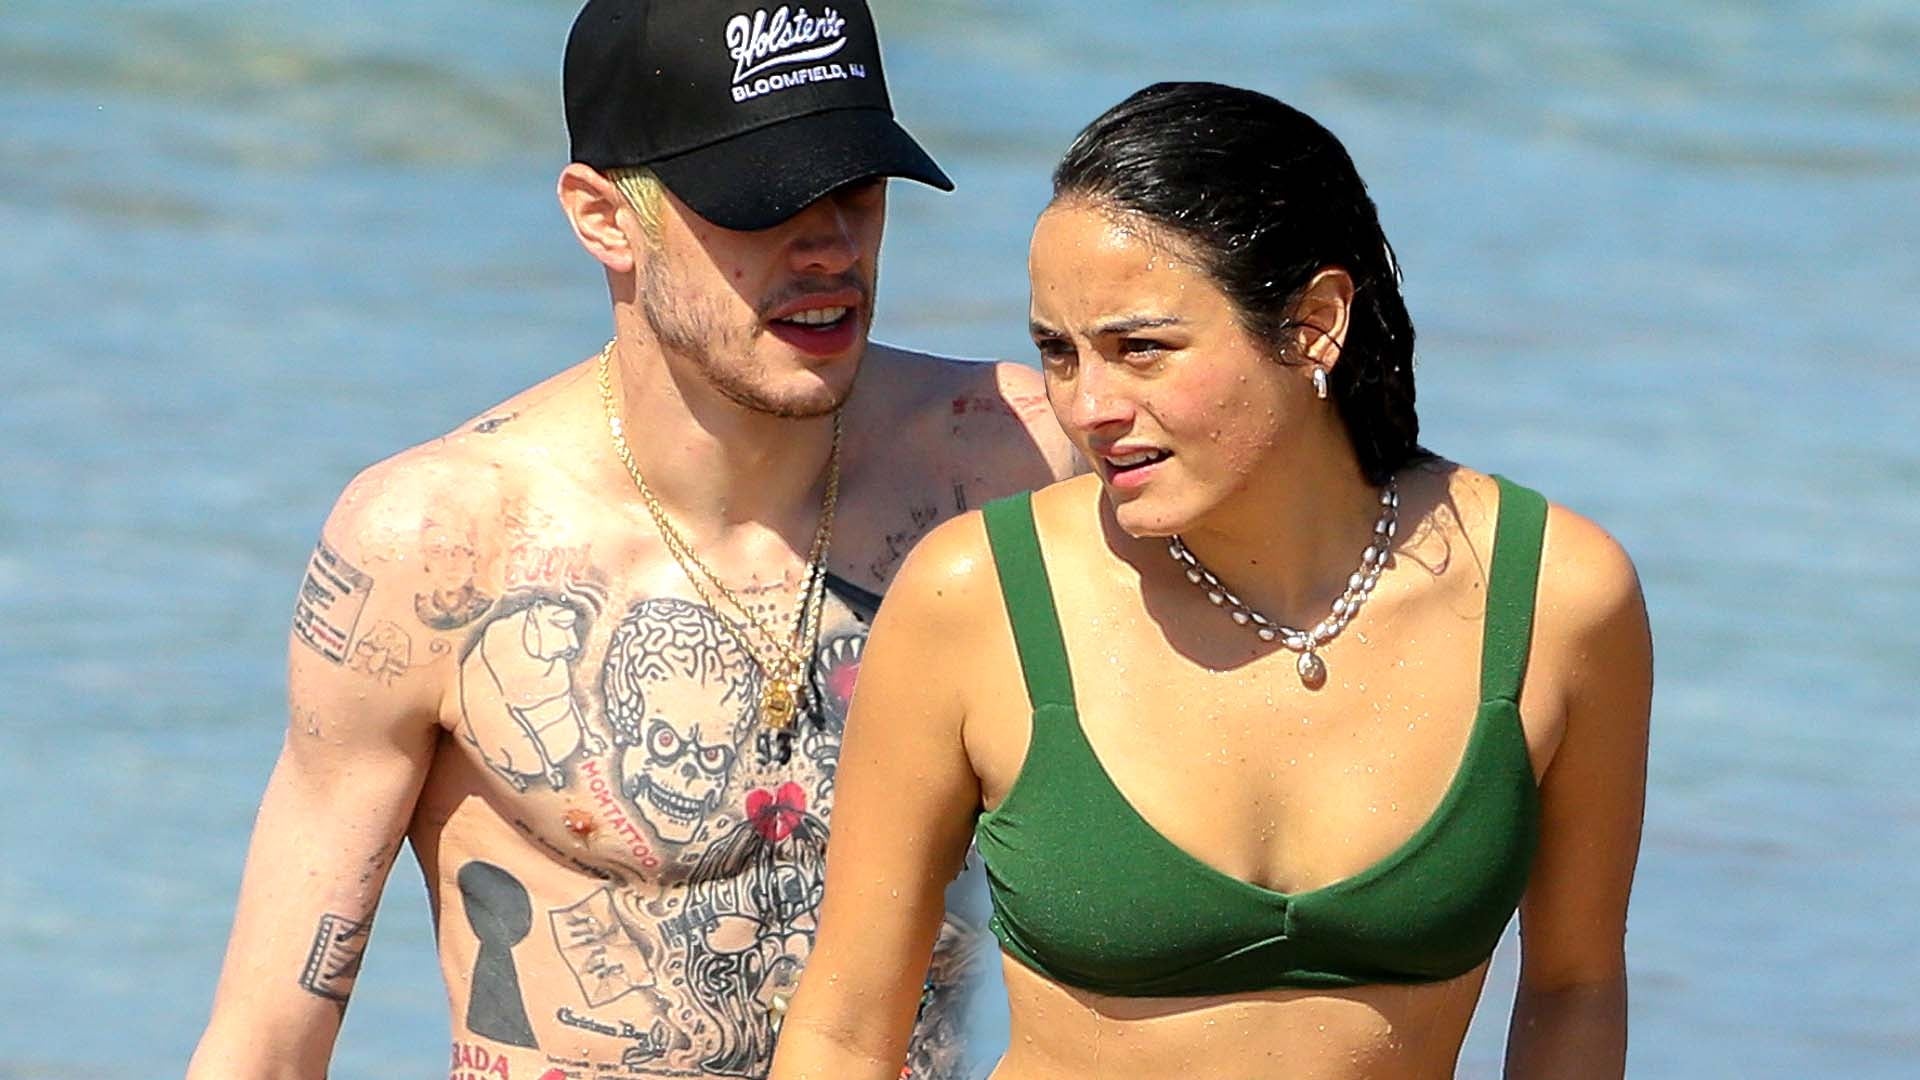 Pete Davidson and Chase Sui Wonders Continue Fueling Romance Rumors on Hawaii Vacation